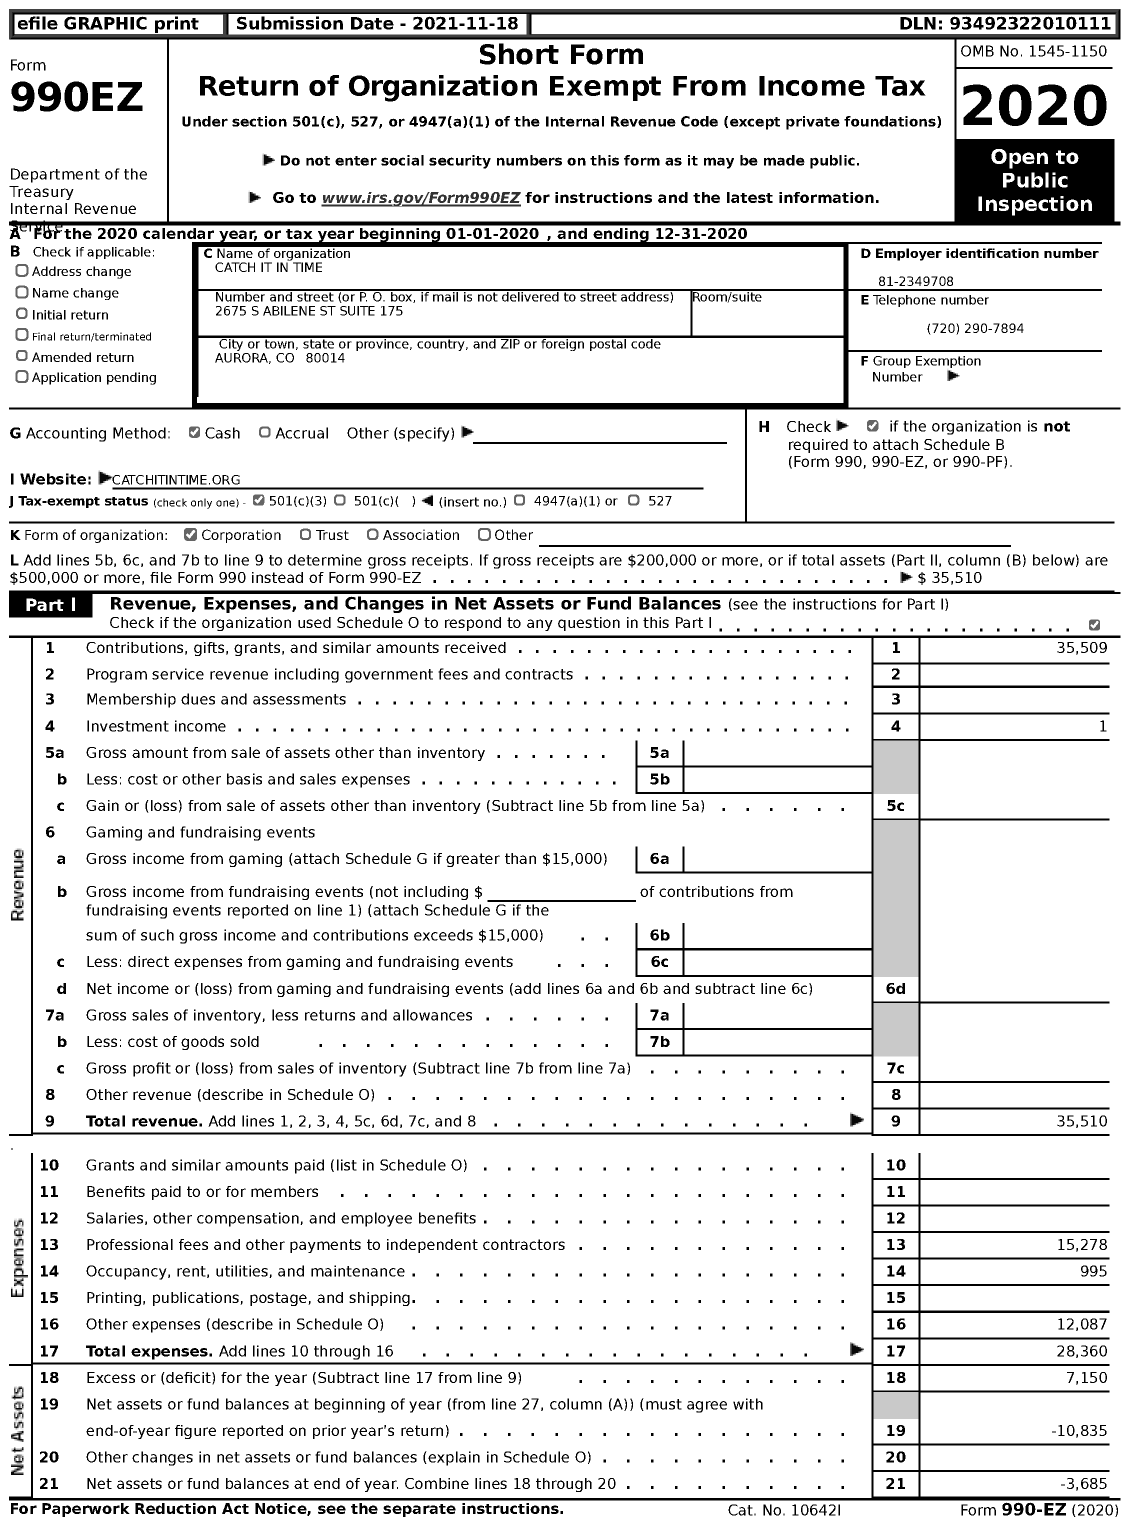 Image of first page of 2020 Form 990EZ for Catch It in Time